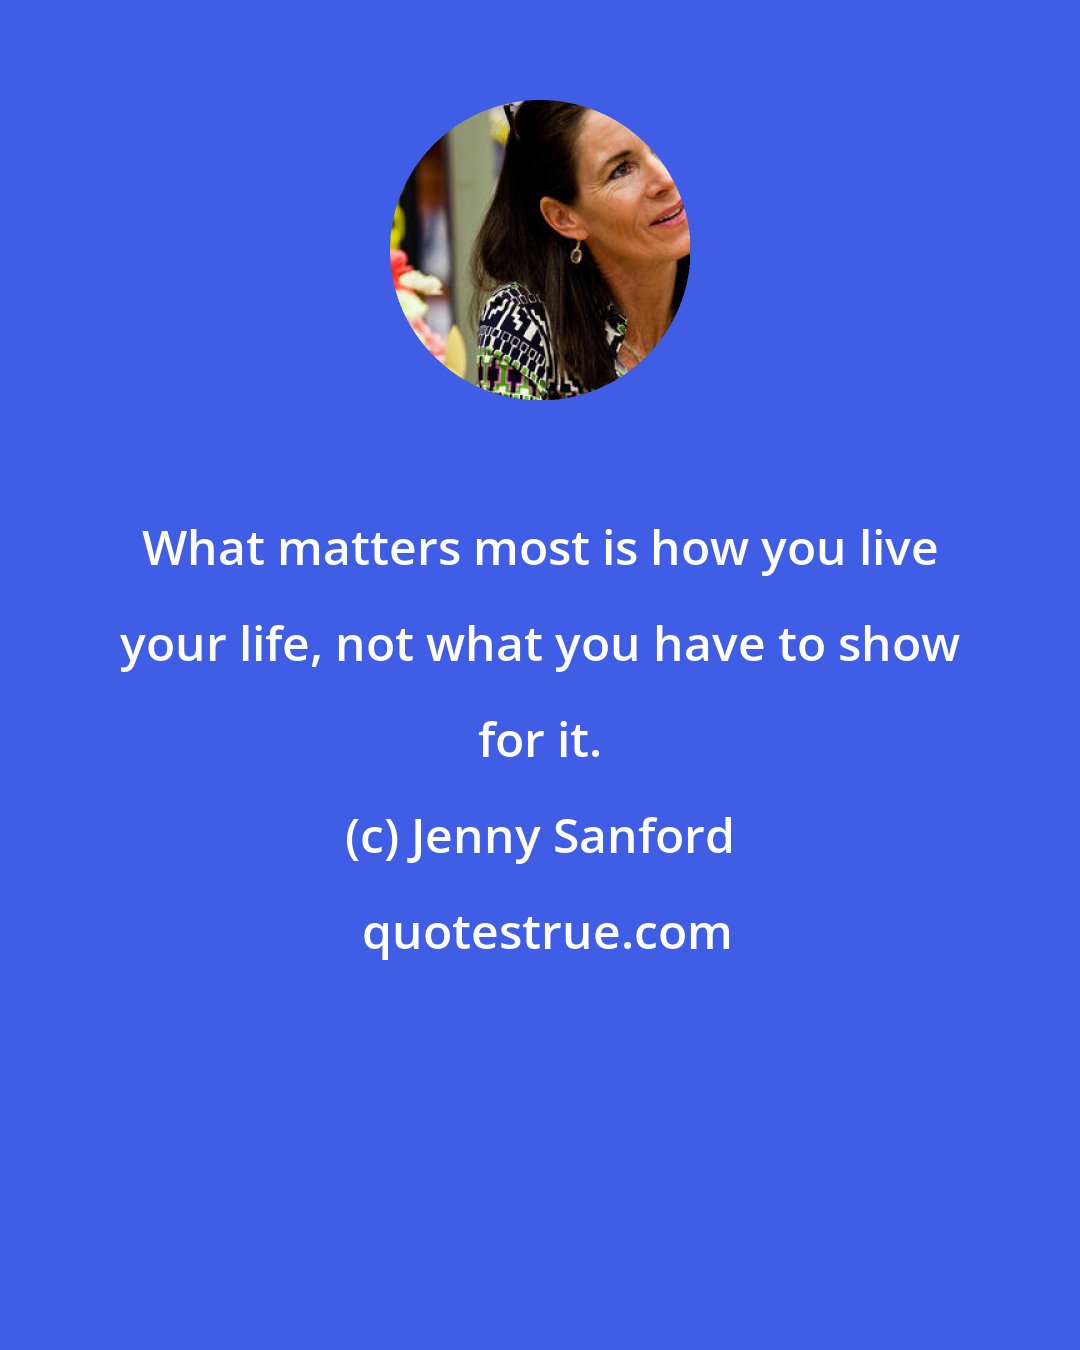 Jenny Sanford: What matters most is how you live your life, not what you have to show for it.